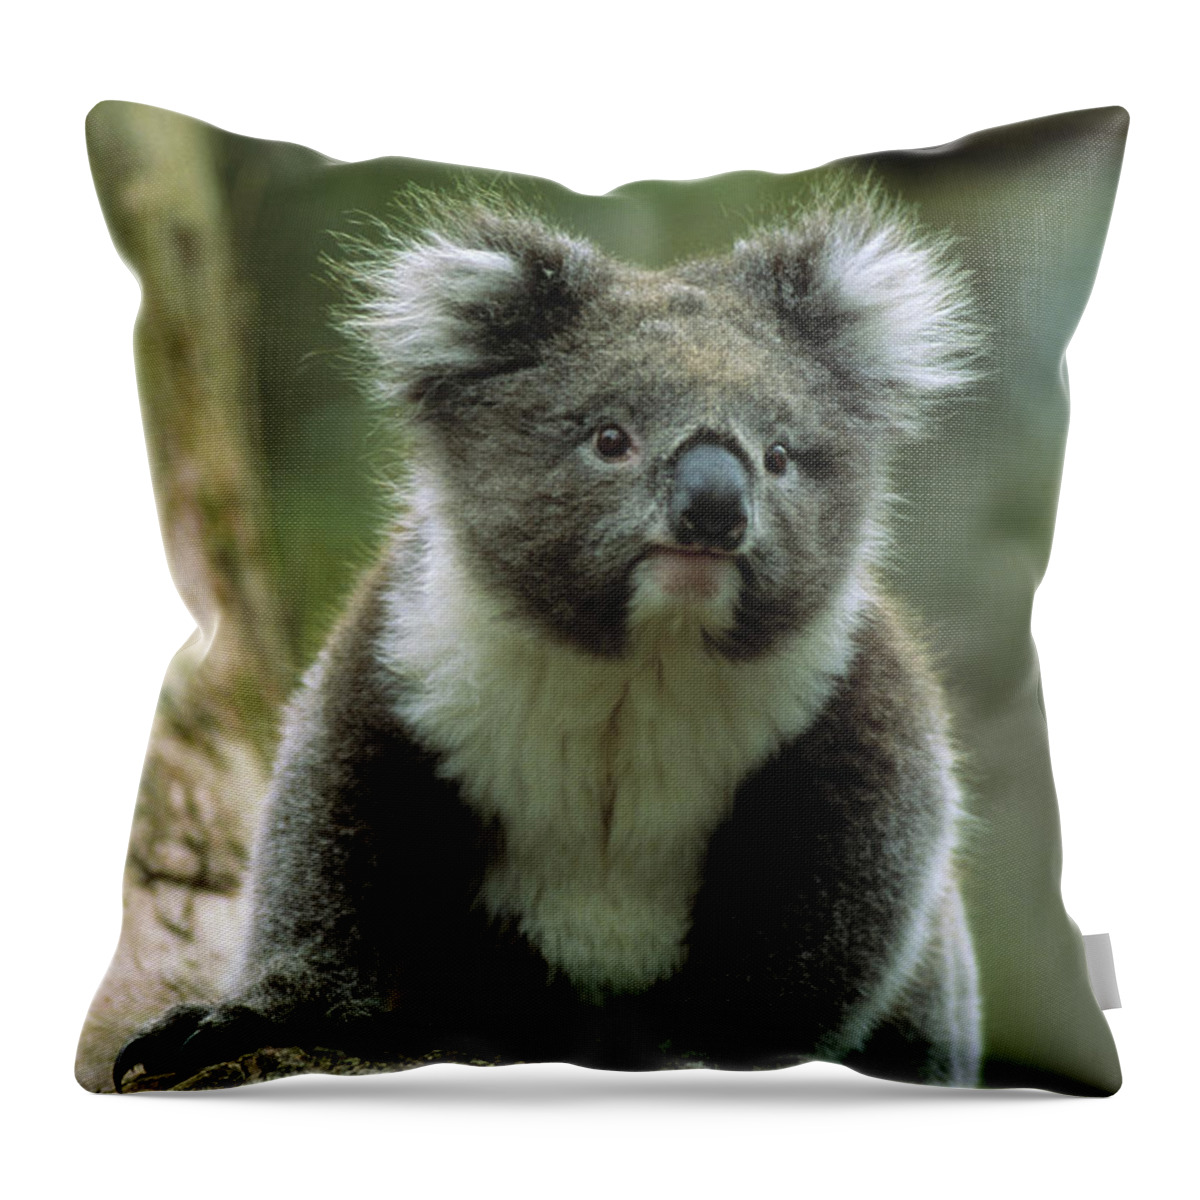 Photography Throw Pillow featuring the photograph Koala On A Tree by Animal Images